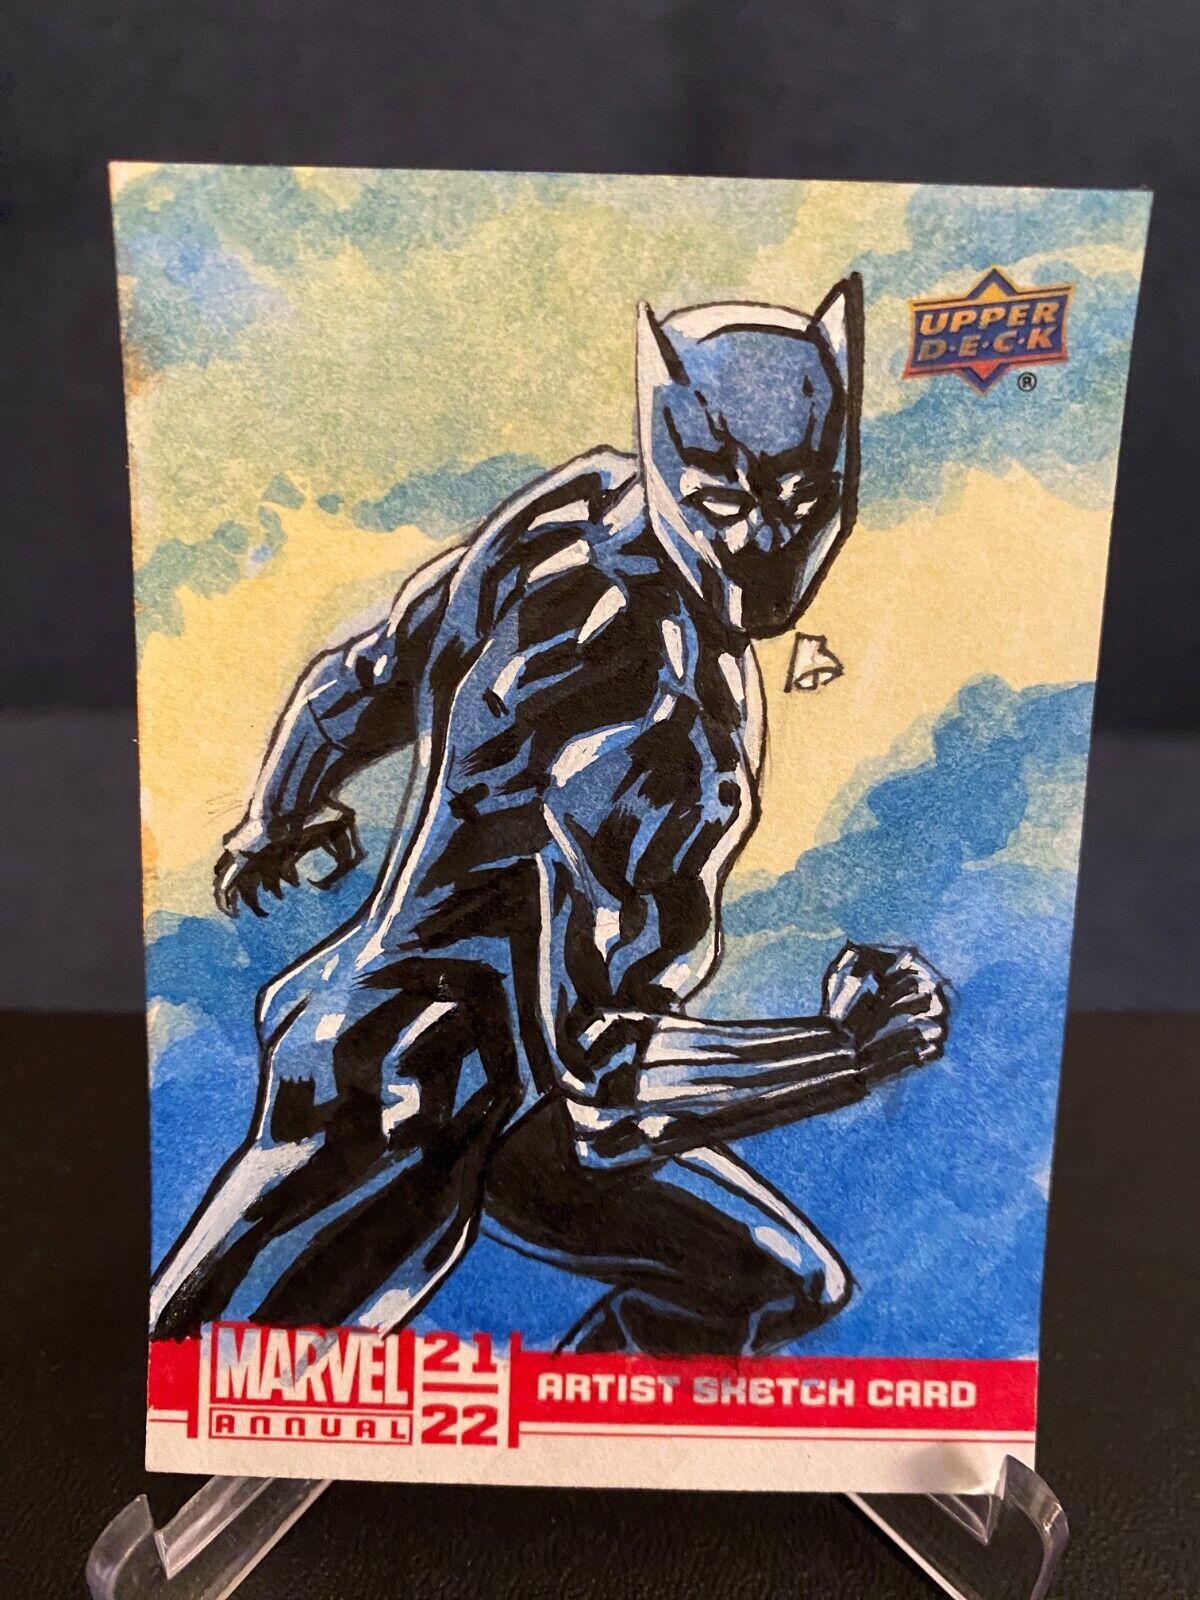 2021 UD Marvel Annual Sketch 1/1 Black Panther by Leon Braojos Auto Sketch